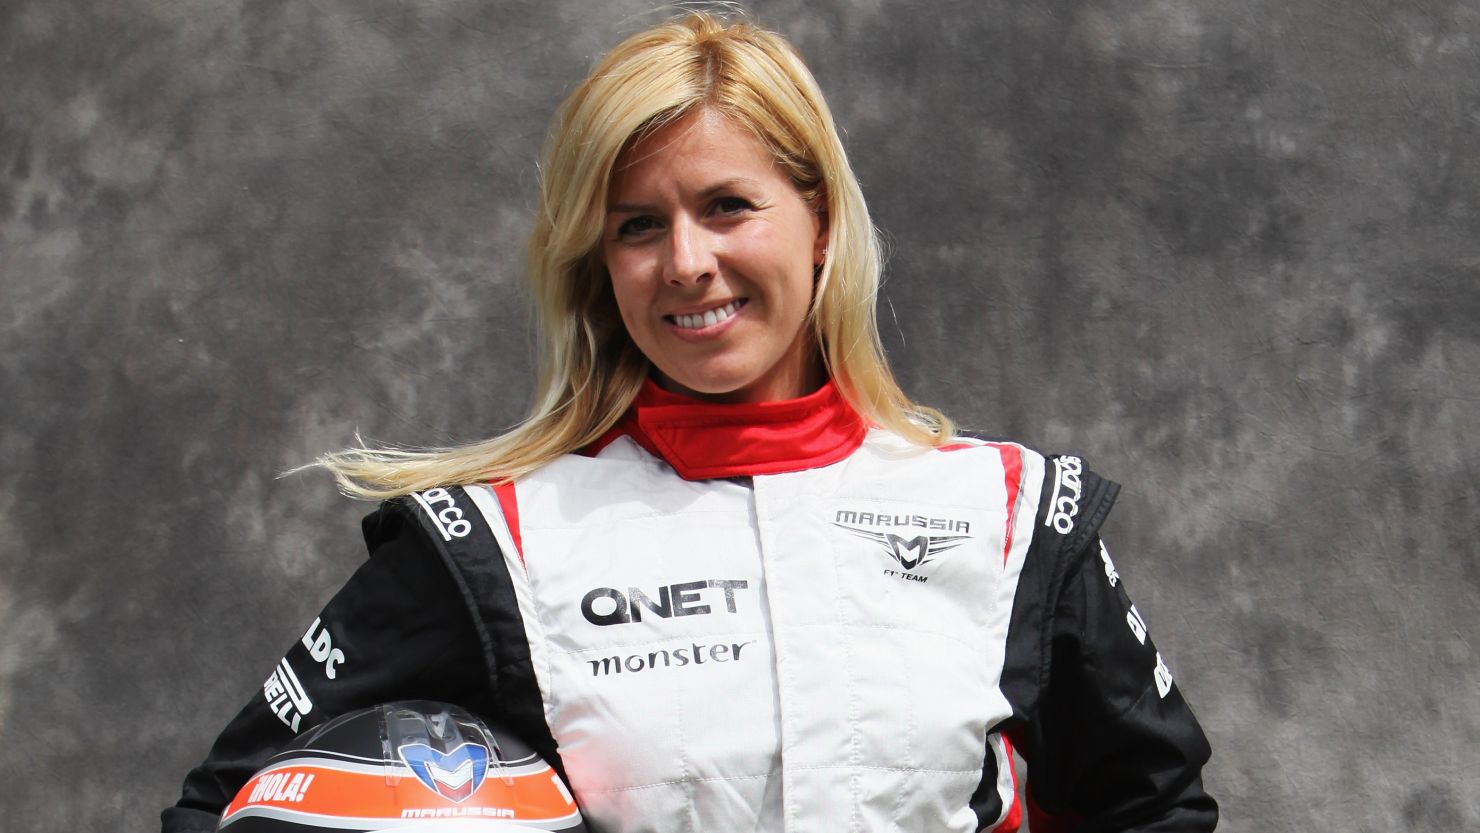 Spain's Maria de Villota was recruited by UK-based Marussia as a test driver in March.